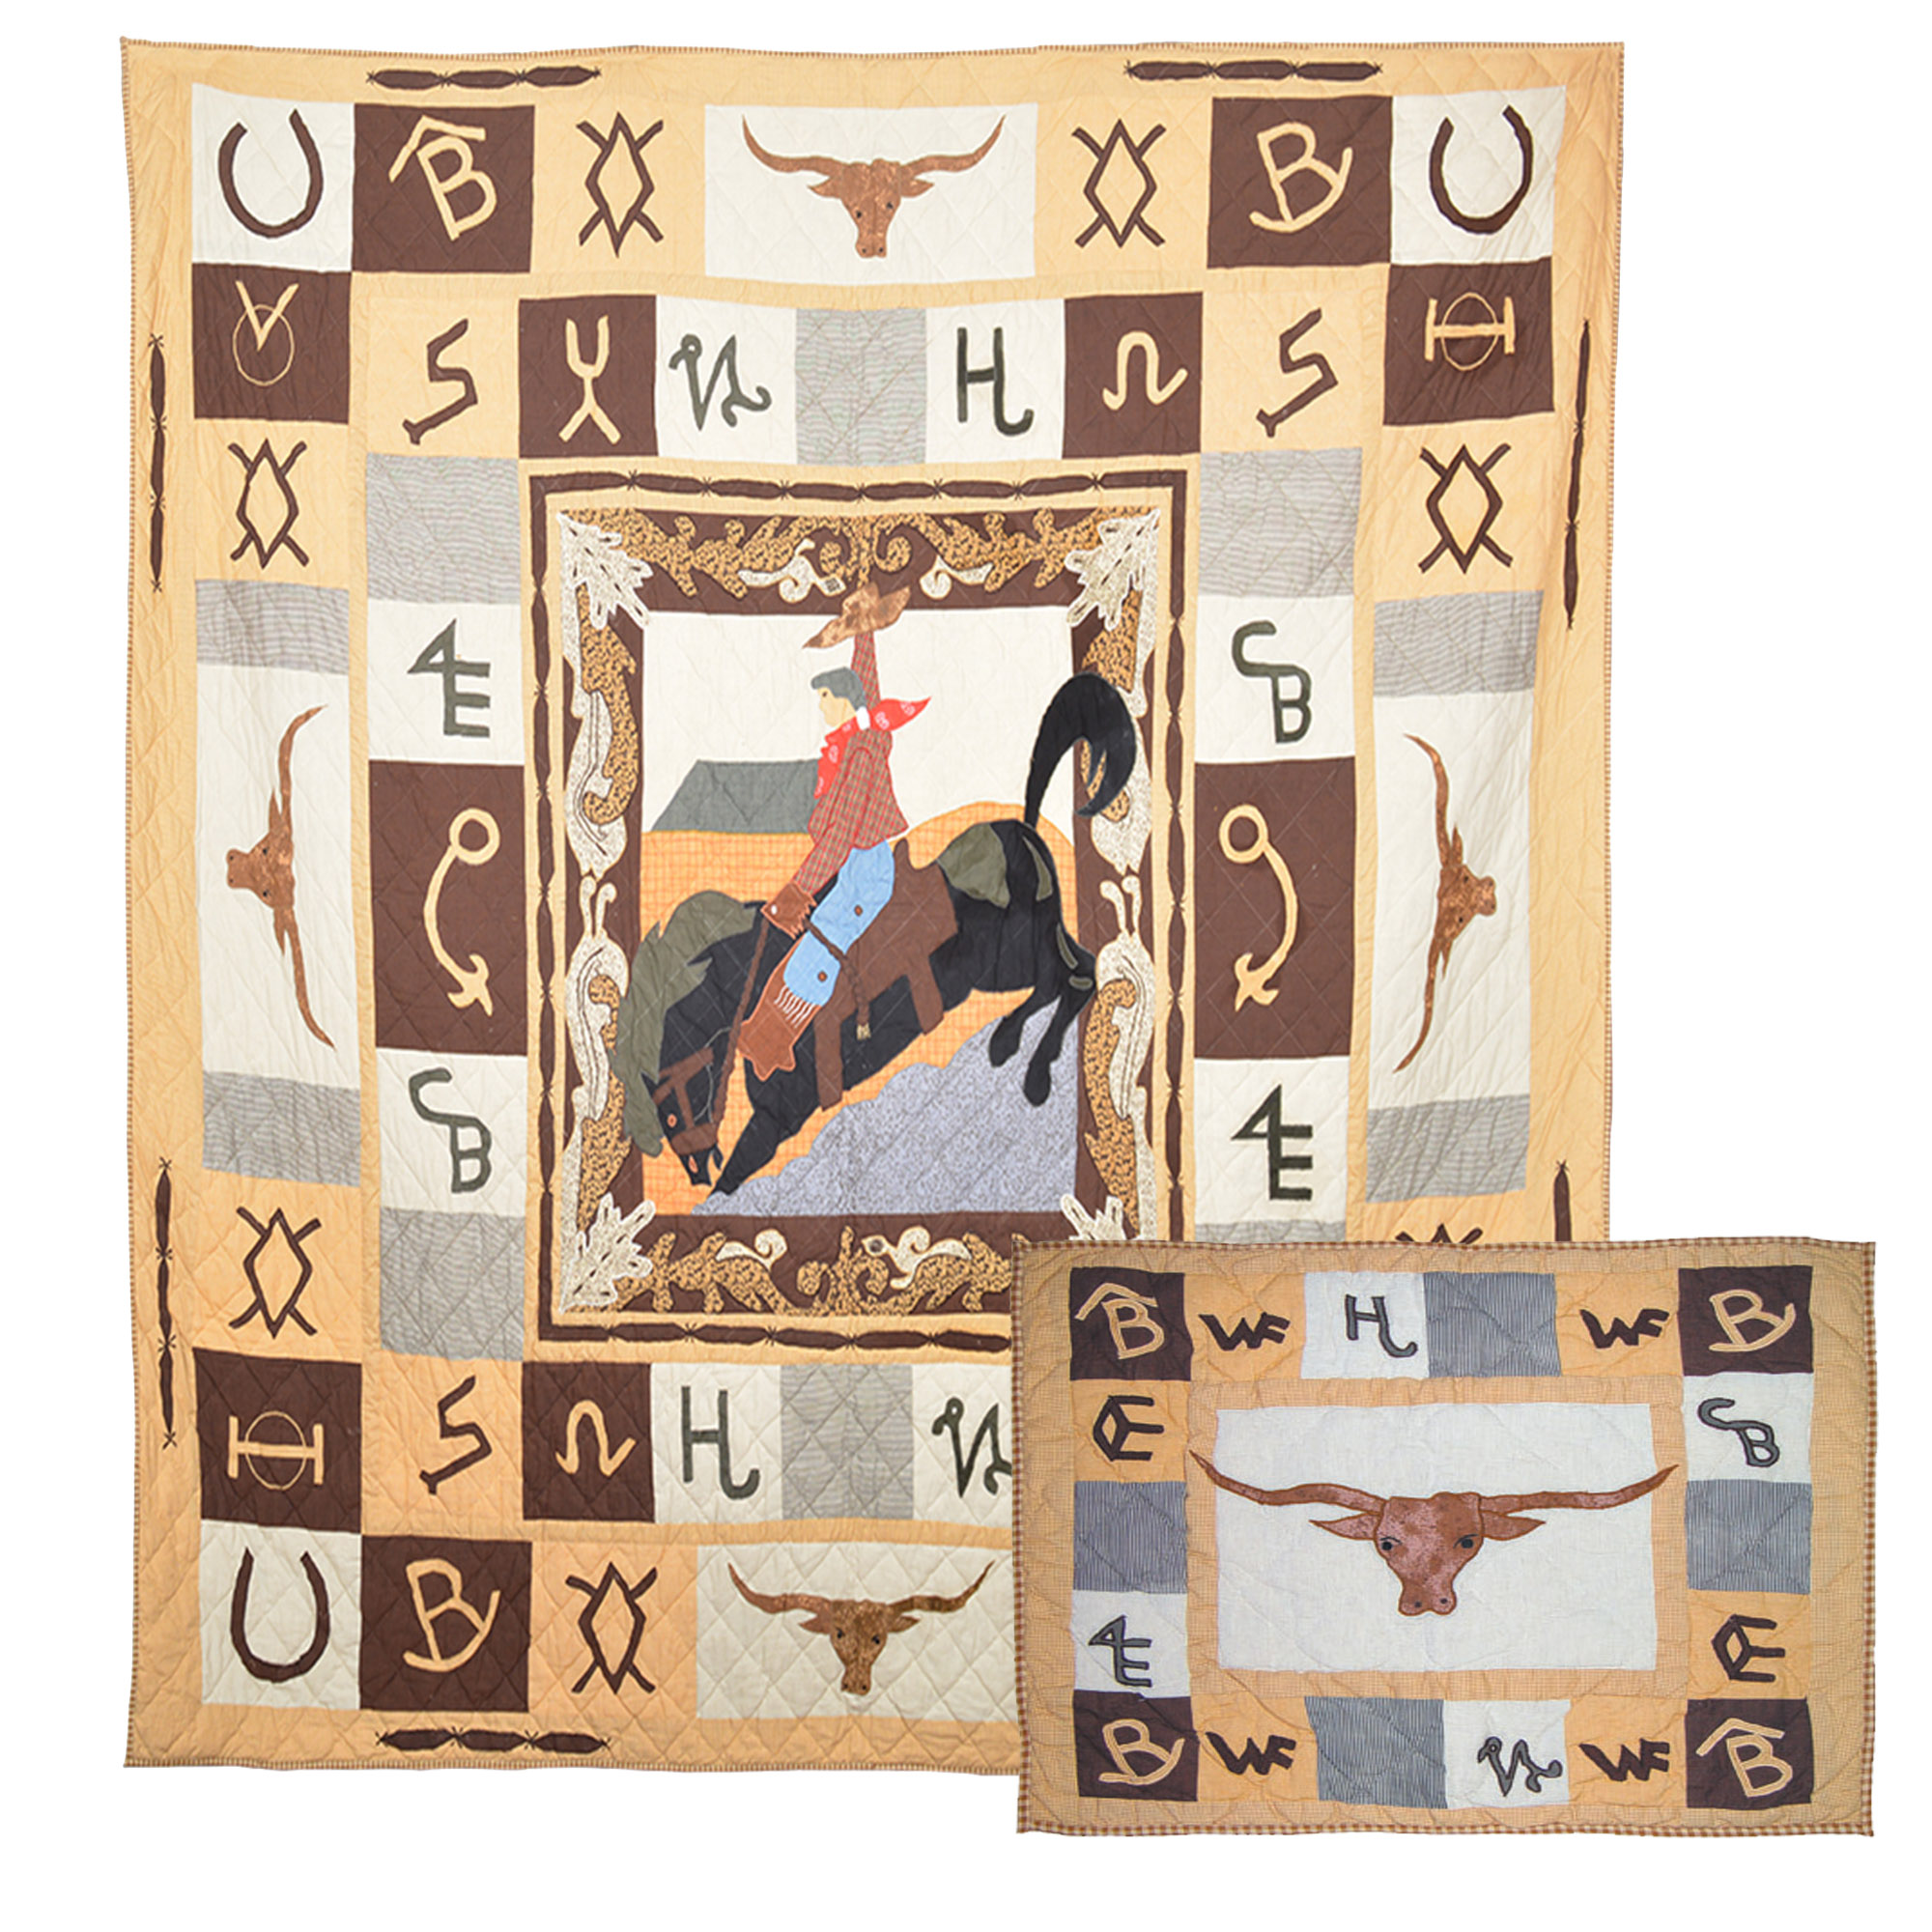 Brand Western Twin Quilt 65"W x 85"L | Buy a Quilt and Get a matching Pillow Sham (27"W X 21"L) Free